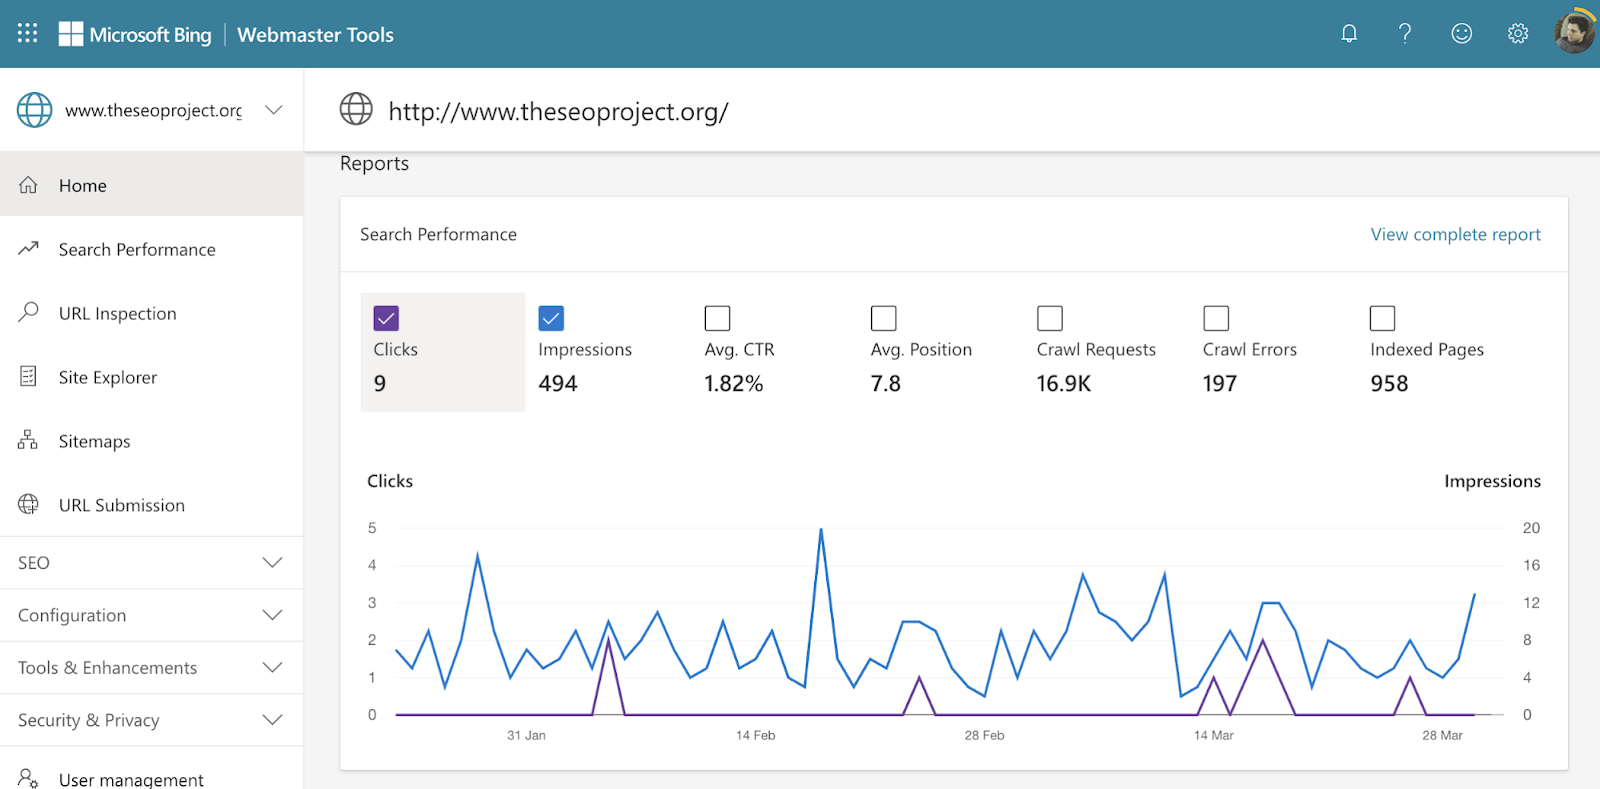 Bing Webmaster Tools' Search Performance report